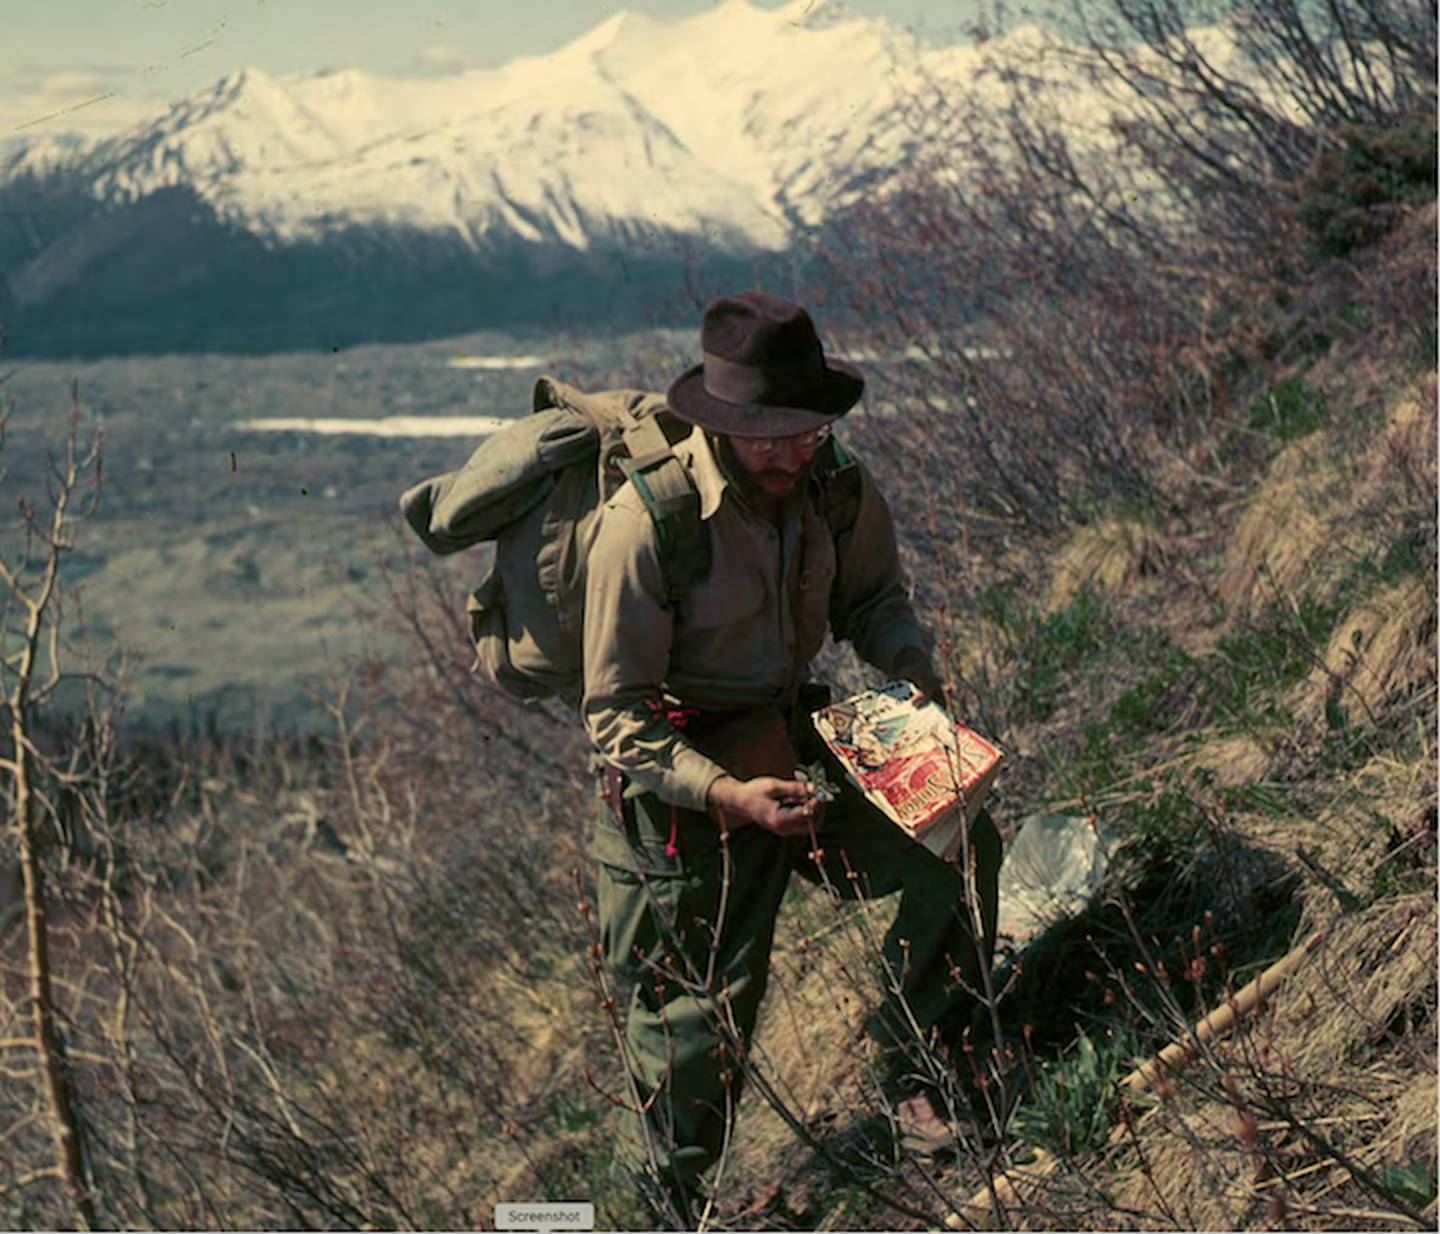 George Argus collects samples of willow shrubs on a slope near the town of McCarthy